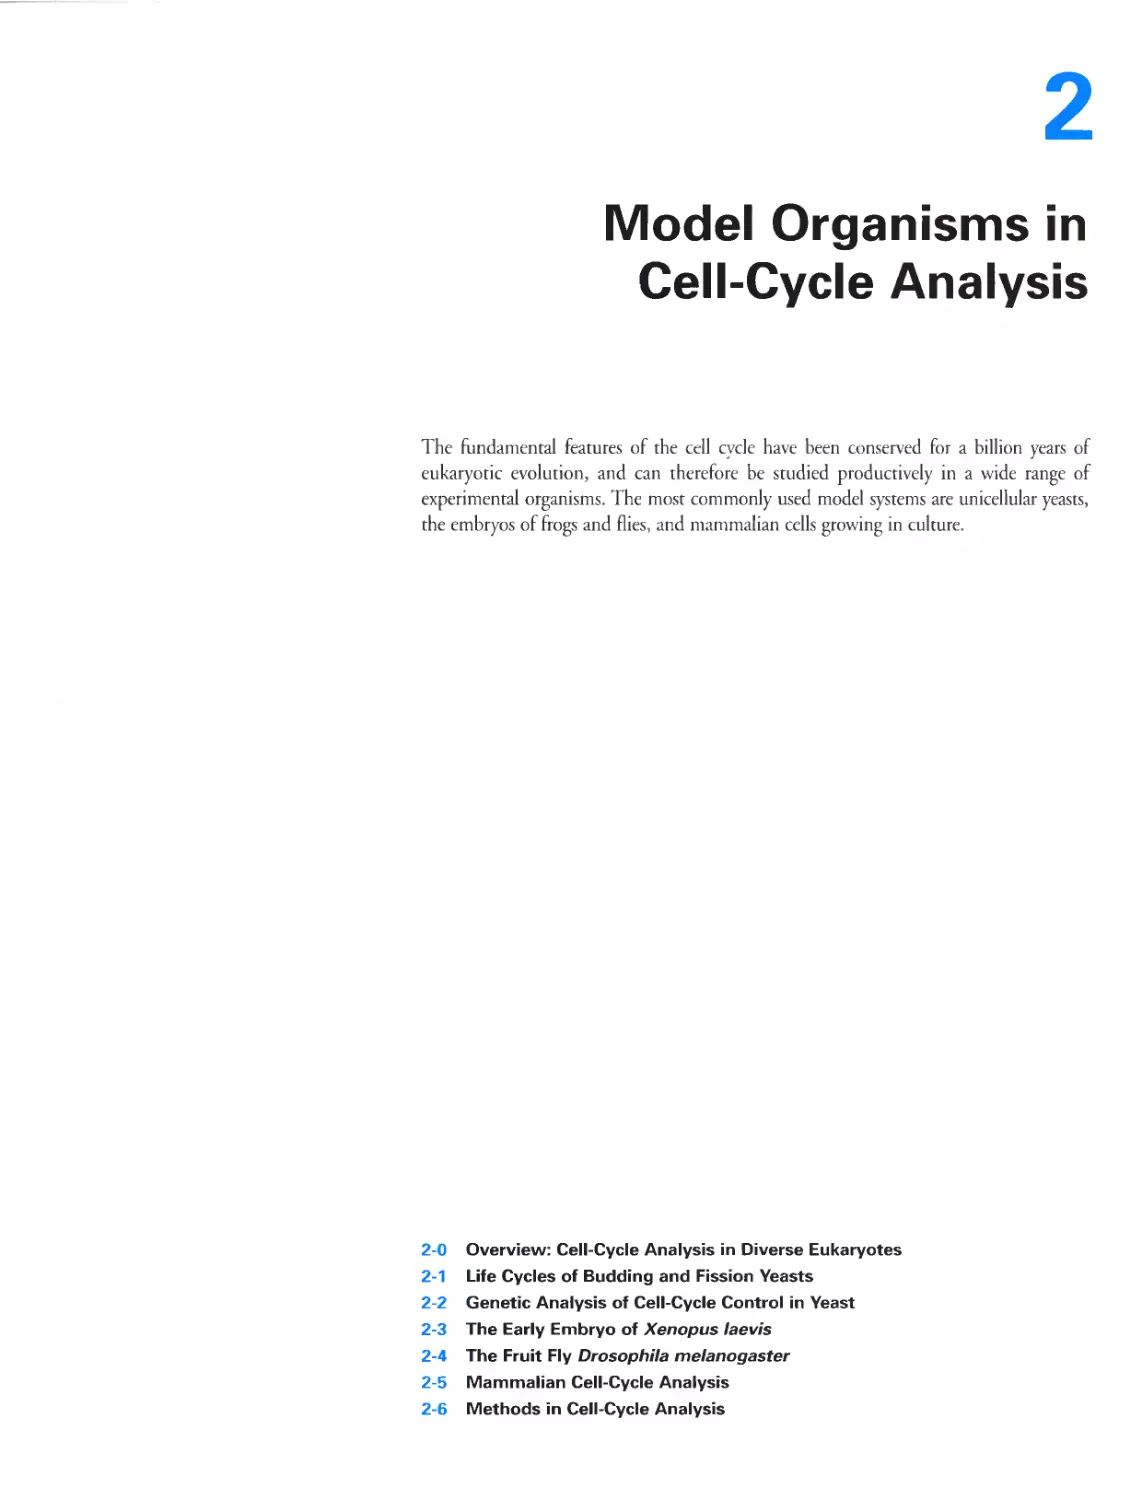 Chapter 2. Model Organisms in Cell-Cycle Analysis